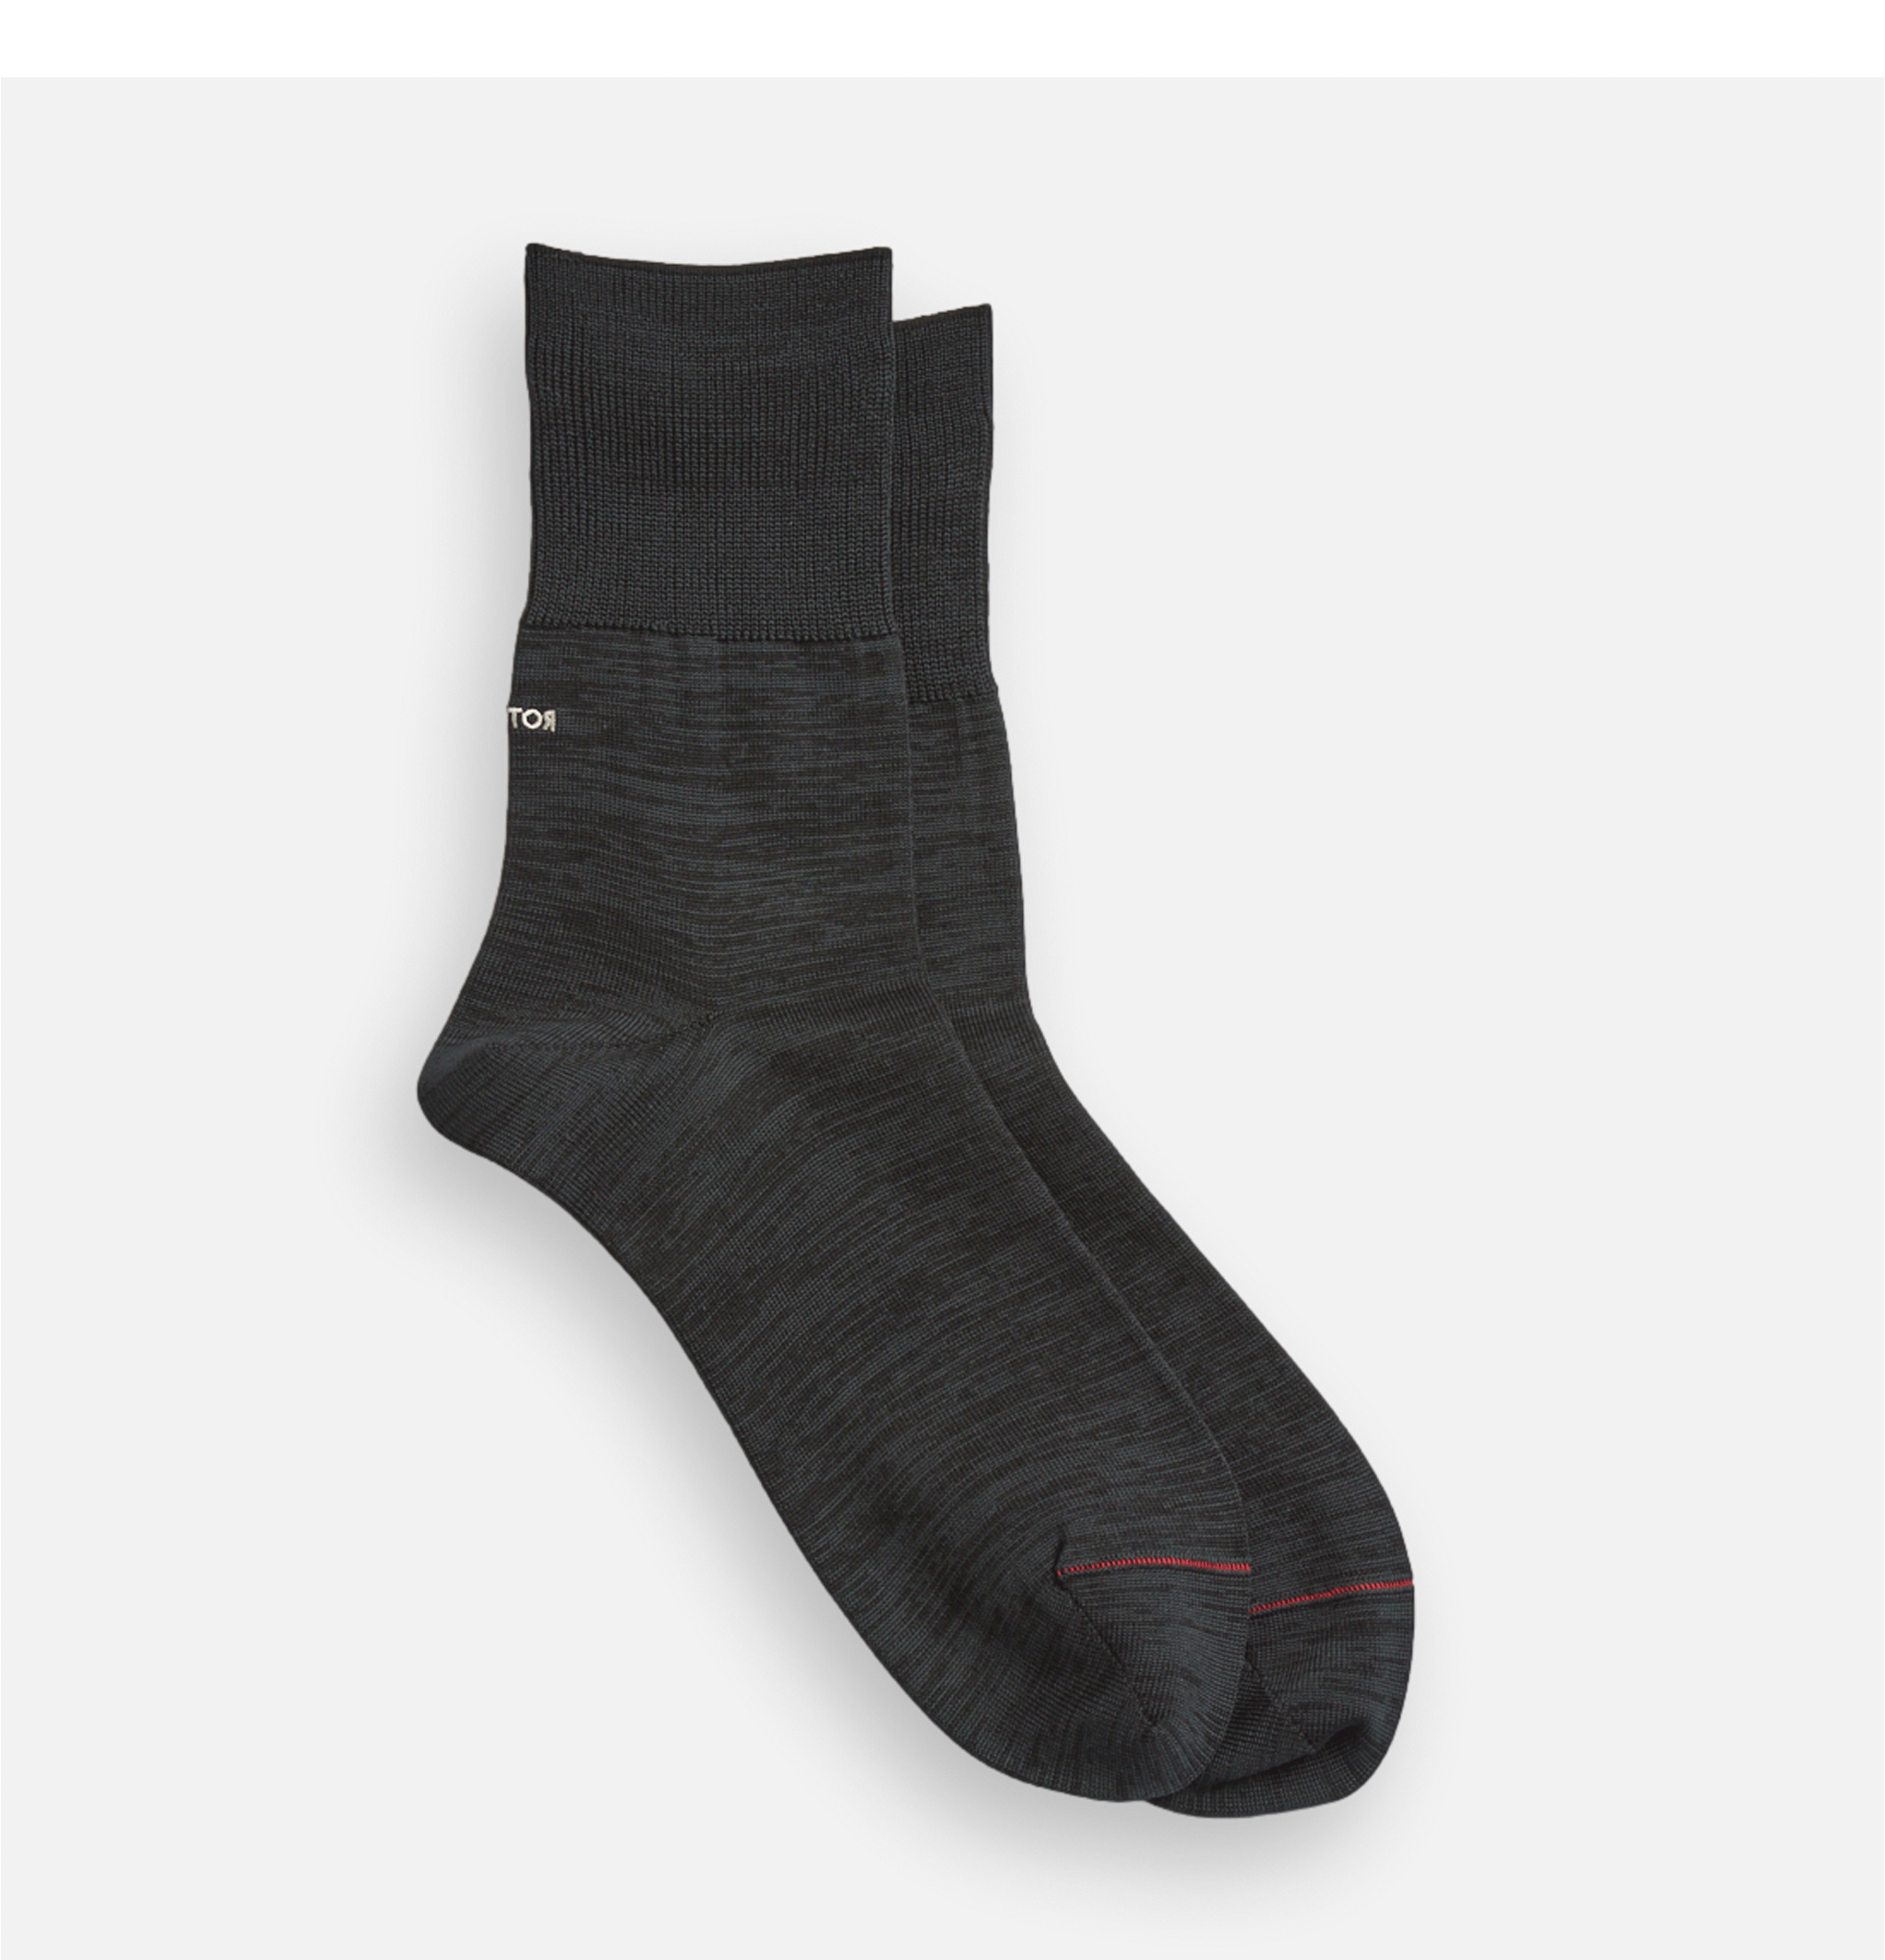 Rototo organic cotton and recycled poly Black socks